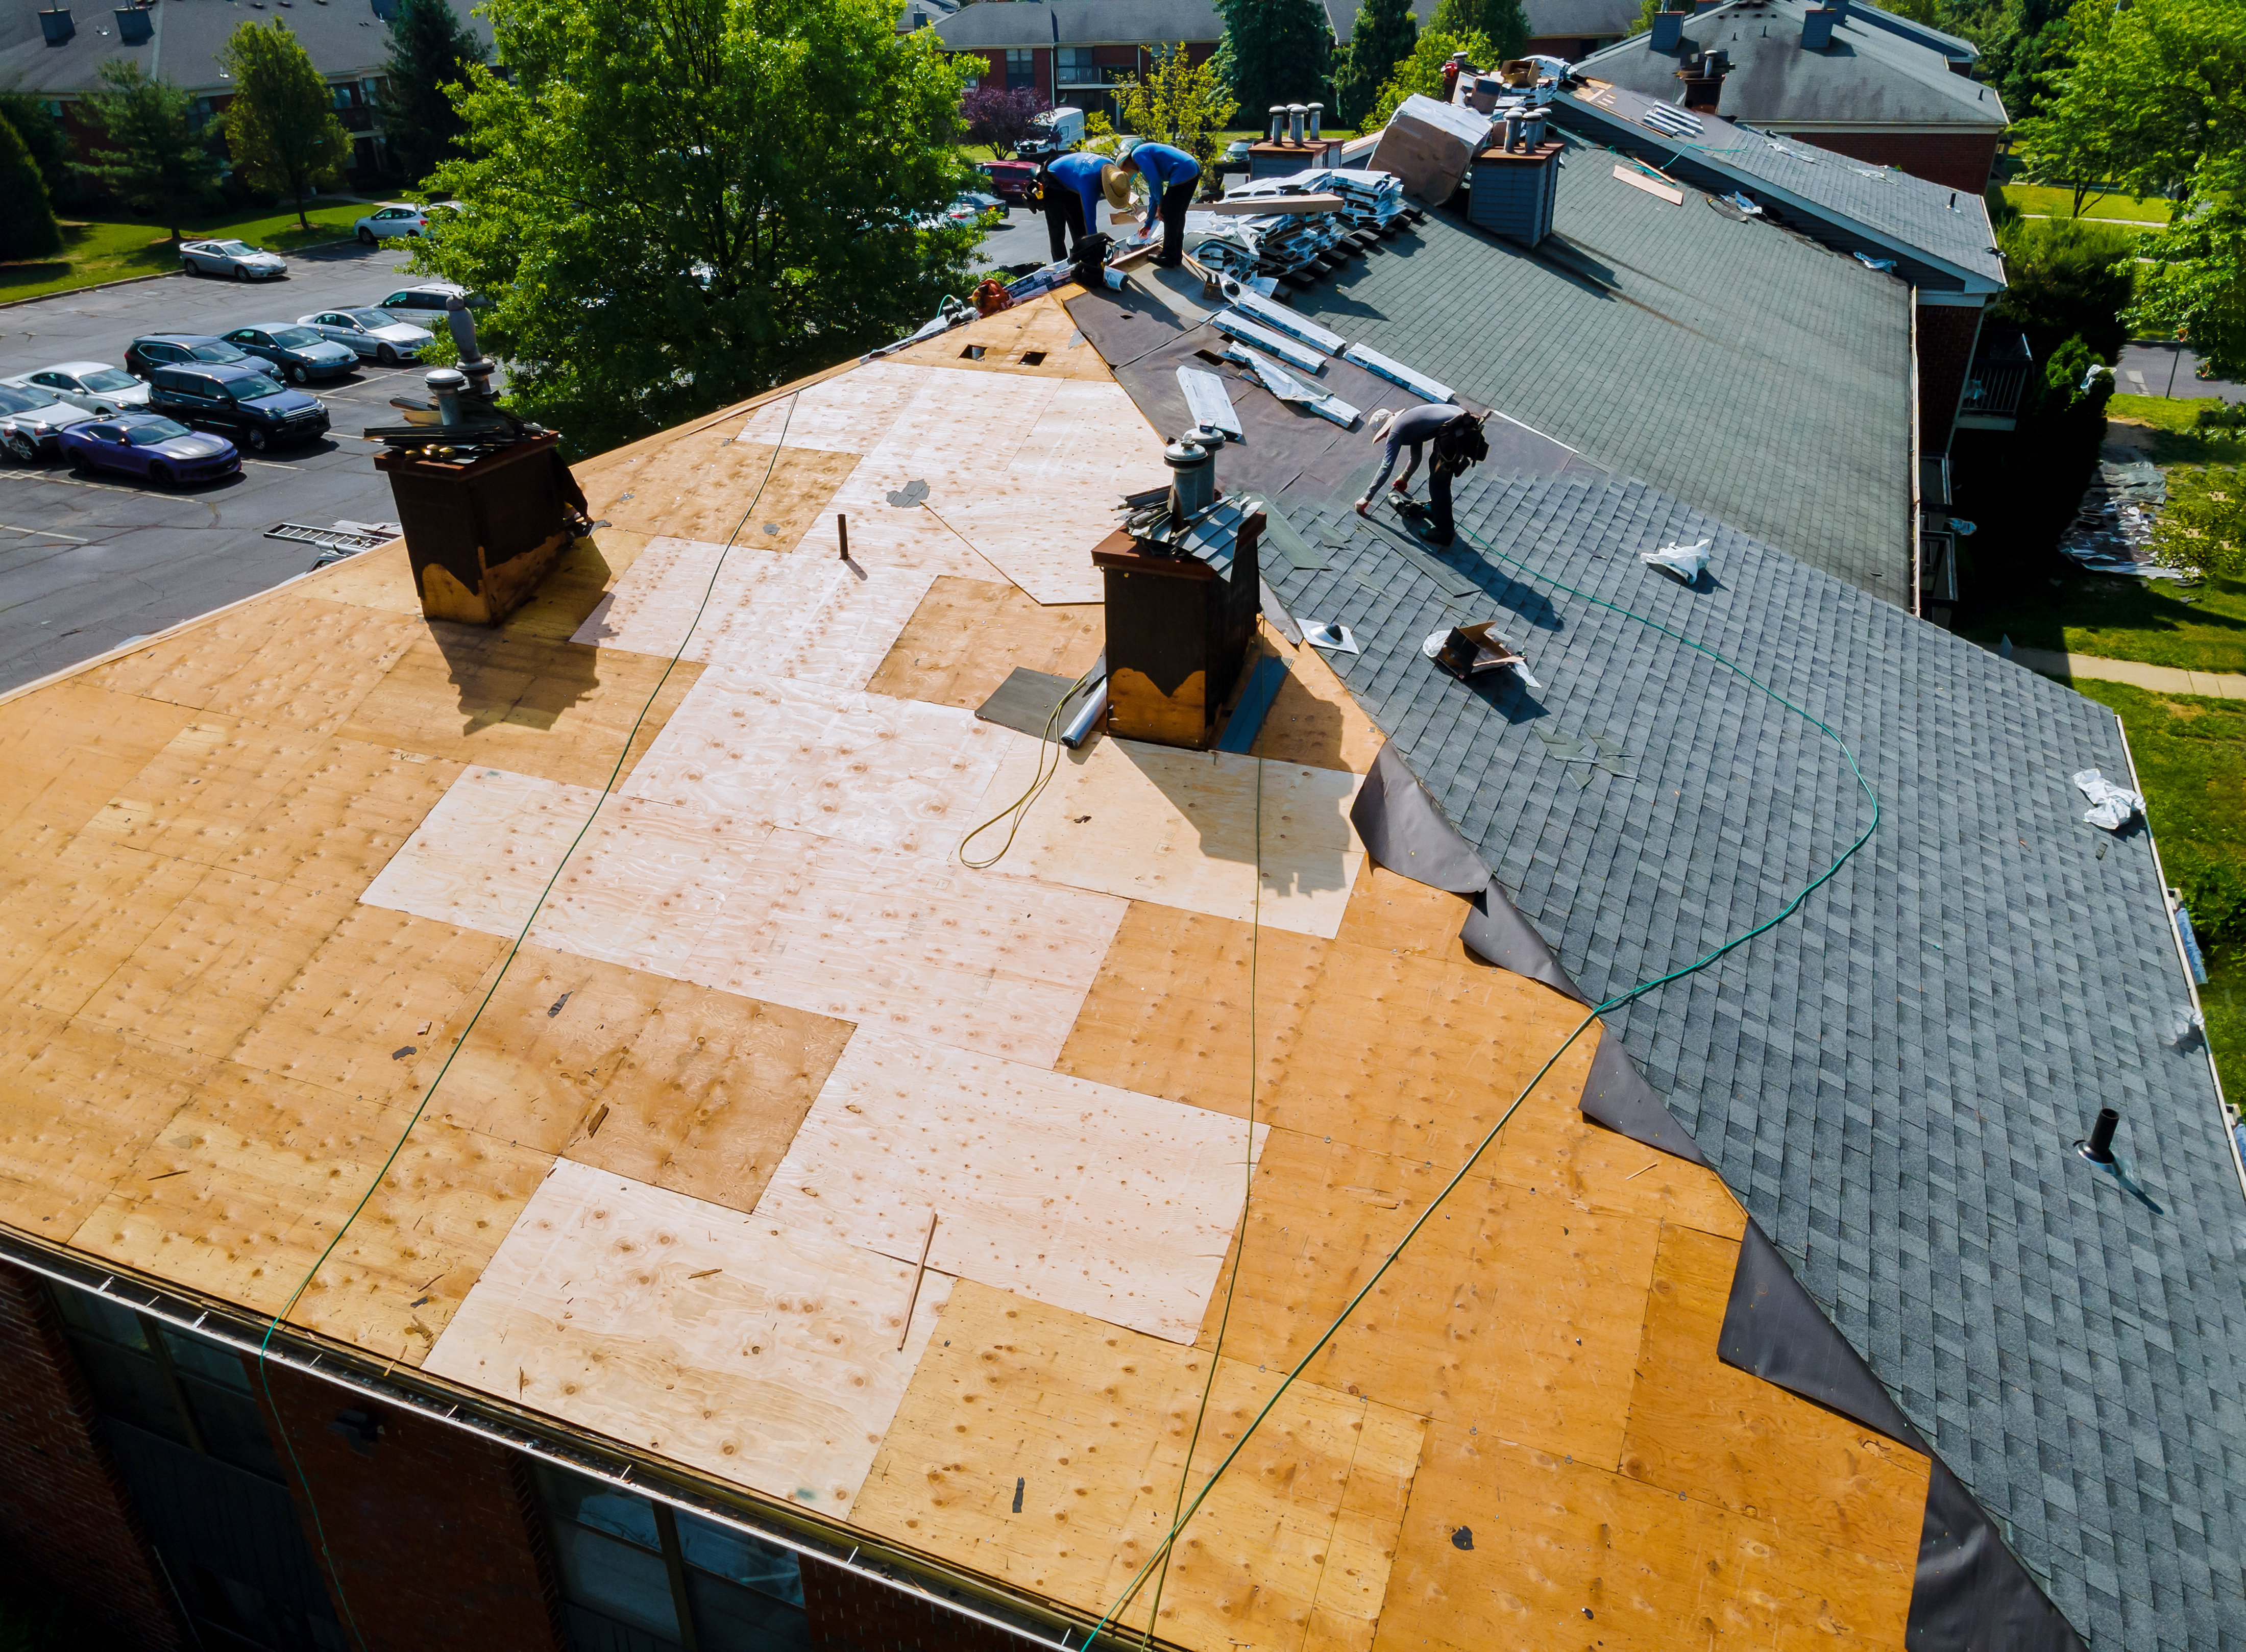 Professional Roofing Contractors in Hamilton are standing on a multi unit, multi pitched roof working to install dark shingles. Half the roof has been shingled; the other half shows the bare plywood sheets ready to be covered. Roll roofing products and packages of shingles appear in the background.